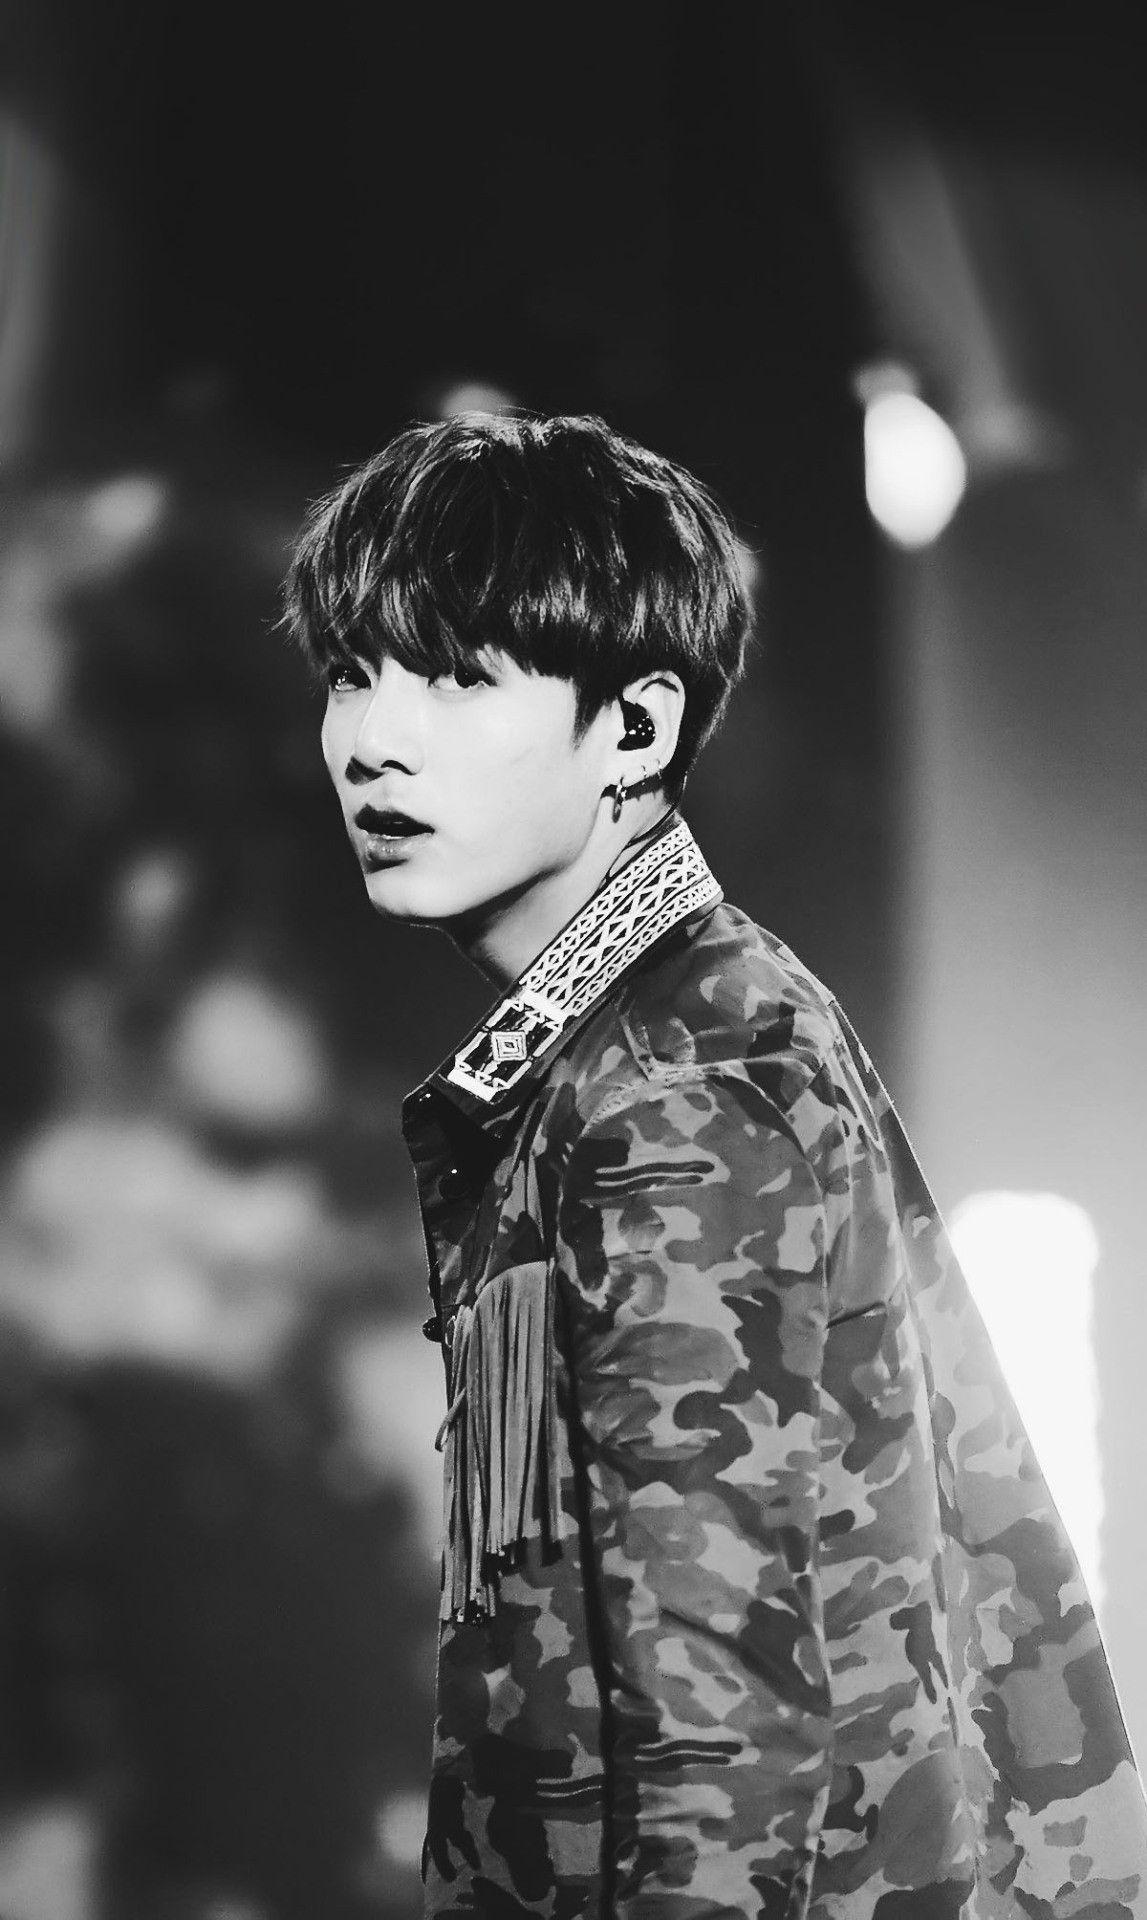  Jungkook  Black  And White Wallpapers  Wallpaper  Cave